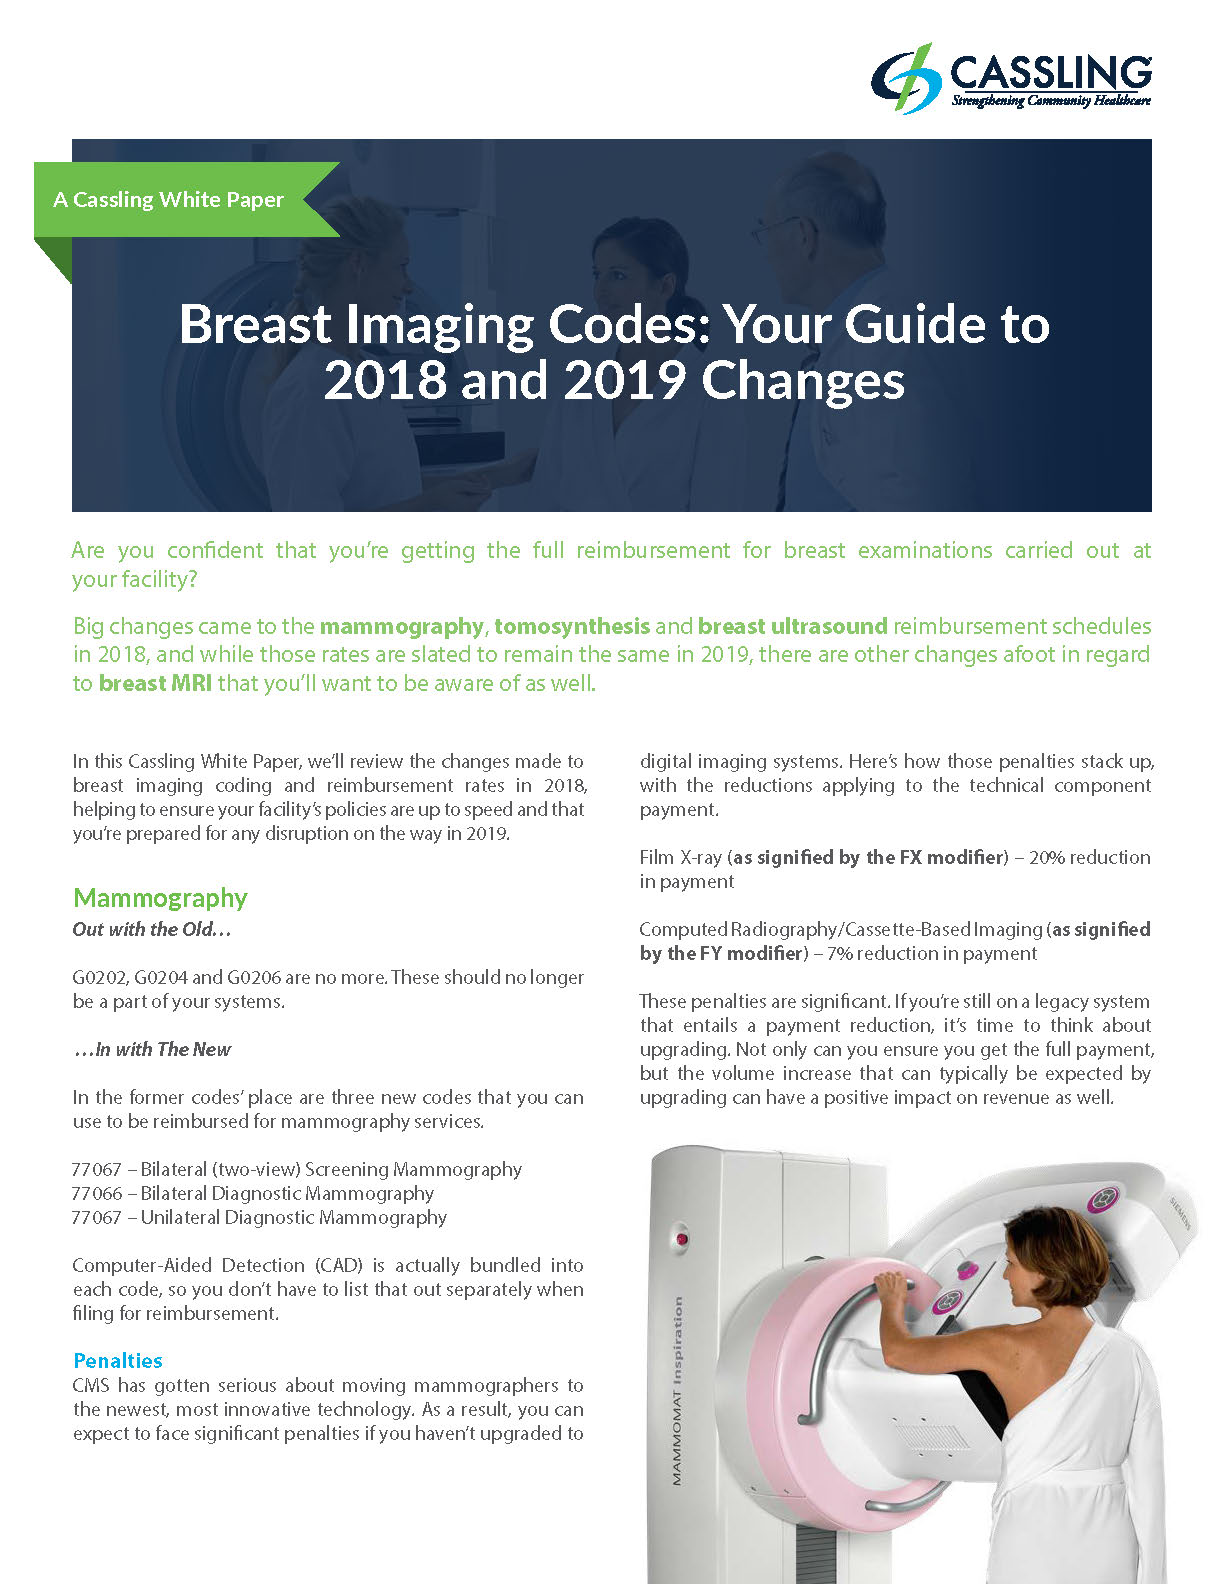 Breast-Imaging-Coding-White-Paper-2018-Cover